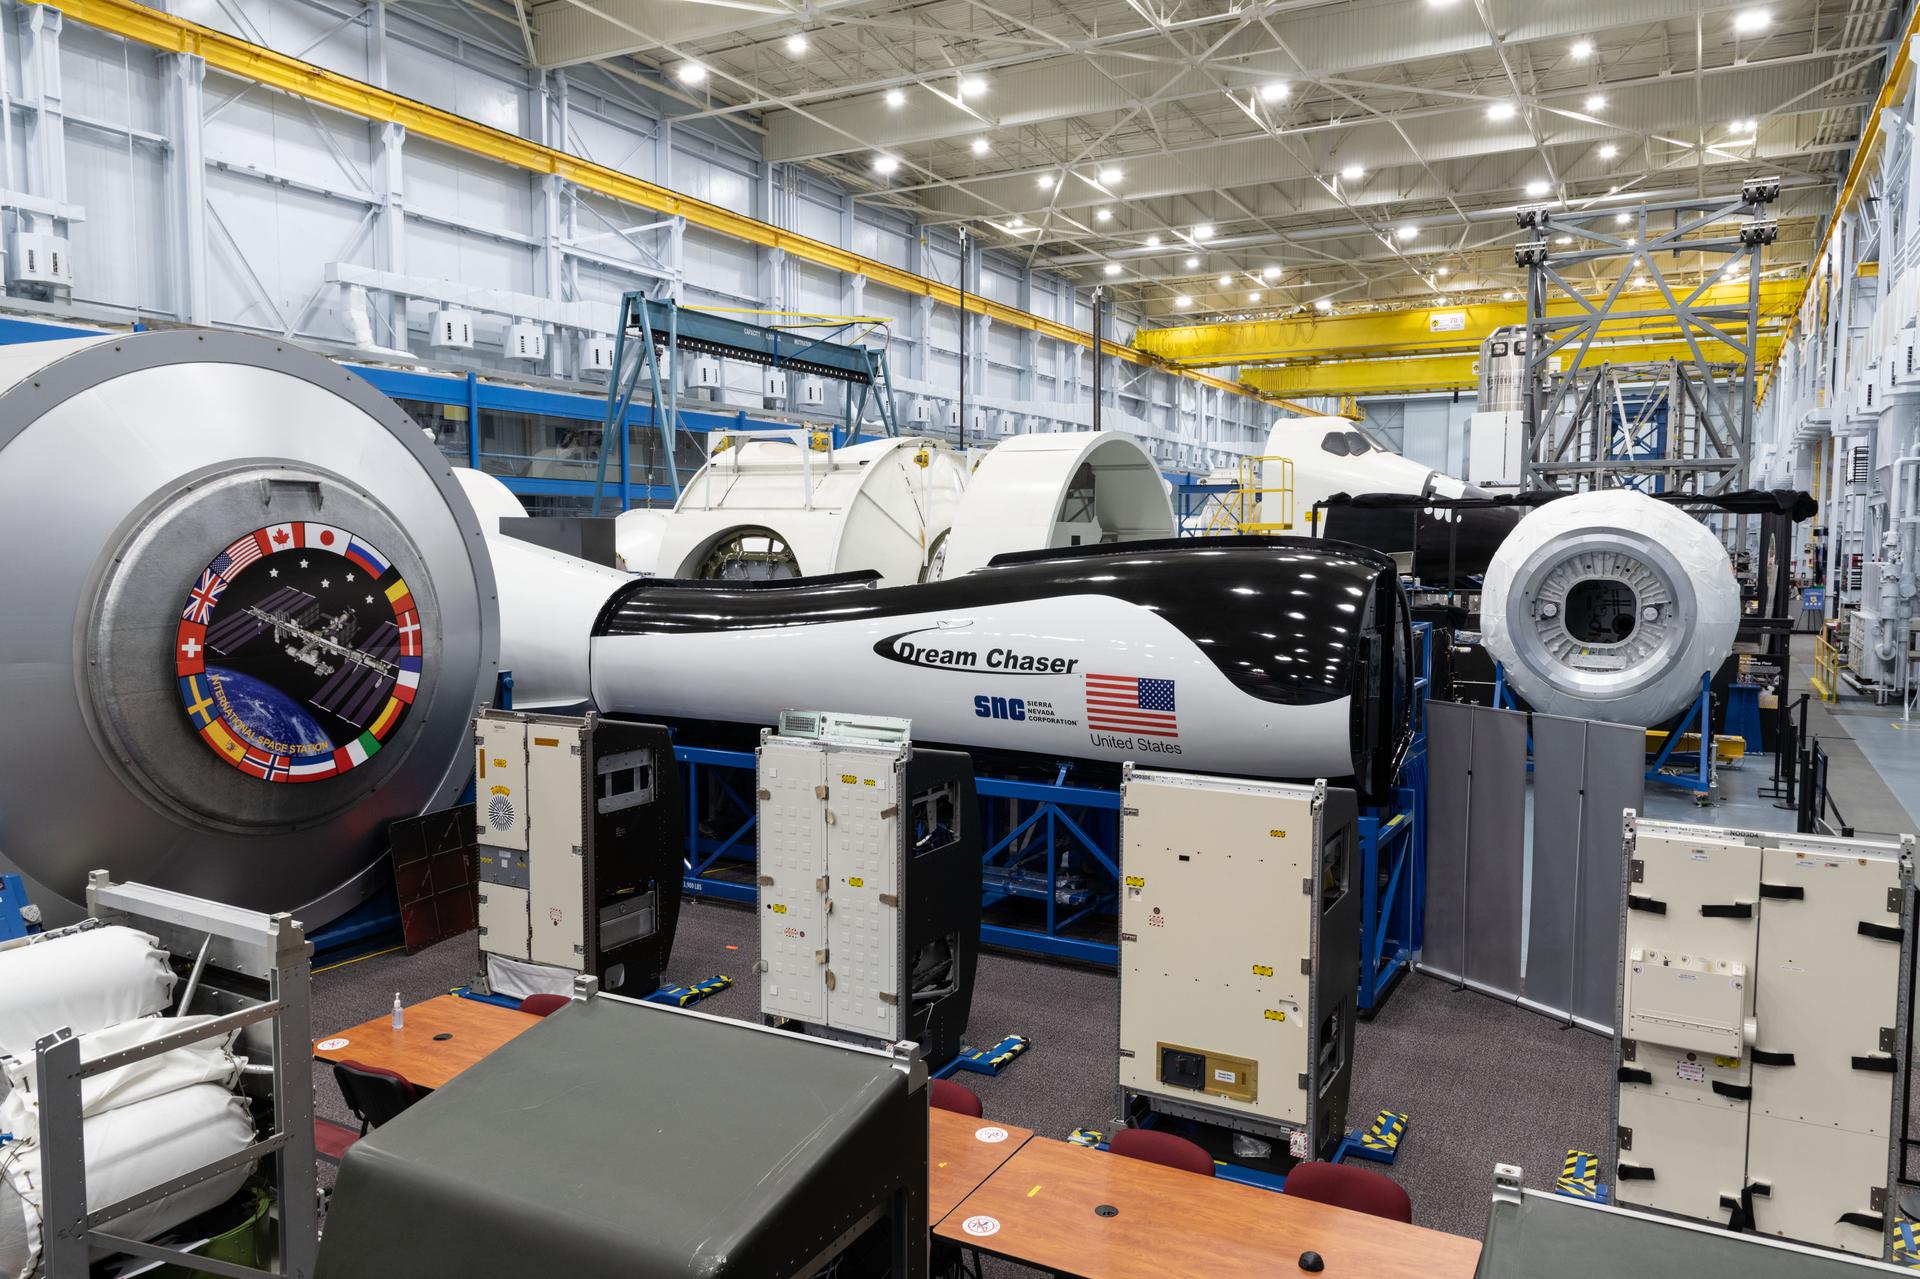 Image of the Dream Chaser vehicle at the Space Vehicle Mockup Facility